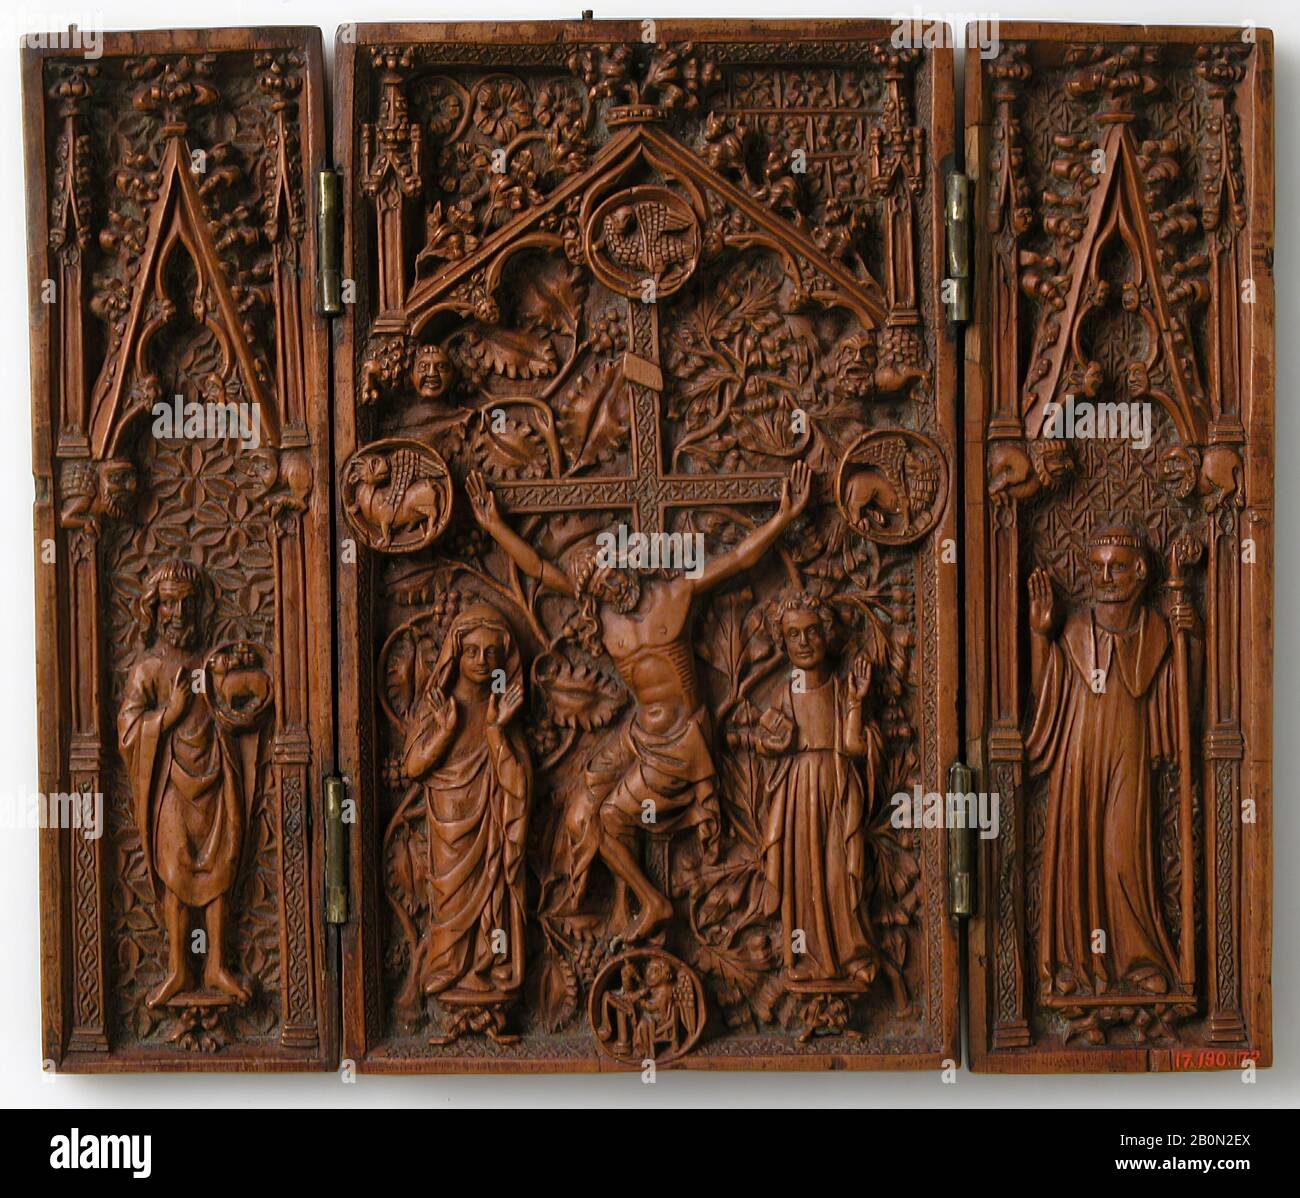 Crucifixion Triptych, German, 15th century, German, Pearwood, Overall: 4 15/16 x 5 7/8 x 1/4in. (12.6 x 15 x 0.6cm), wings closed: 2 15/16 x 9/16in. (7.4 x 1.4cm), wing: 1 7/16 x 1/4in. (3.7 x 0.6cm), Sculpture-Wood Stock Photo